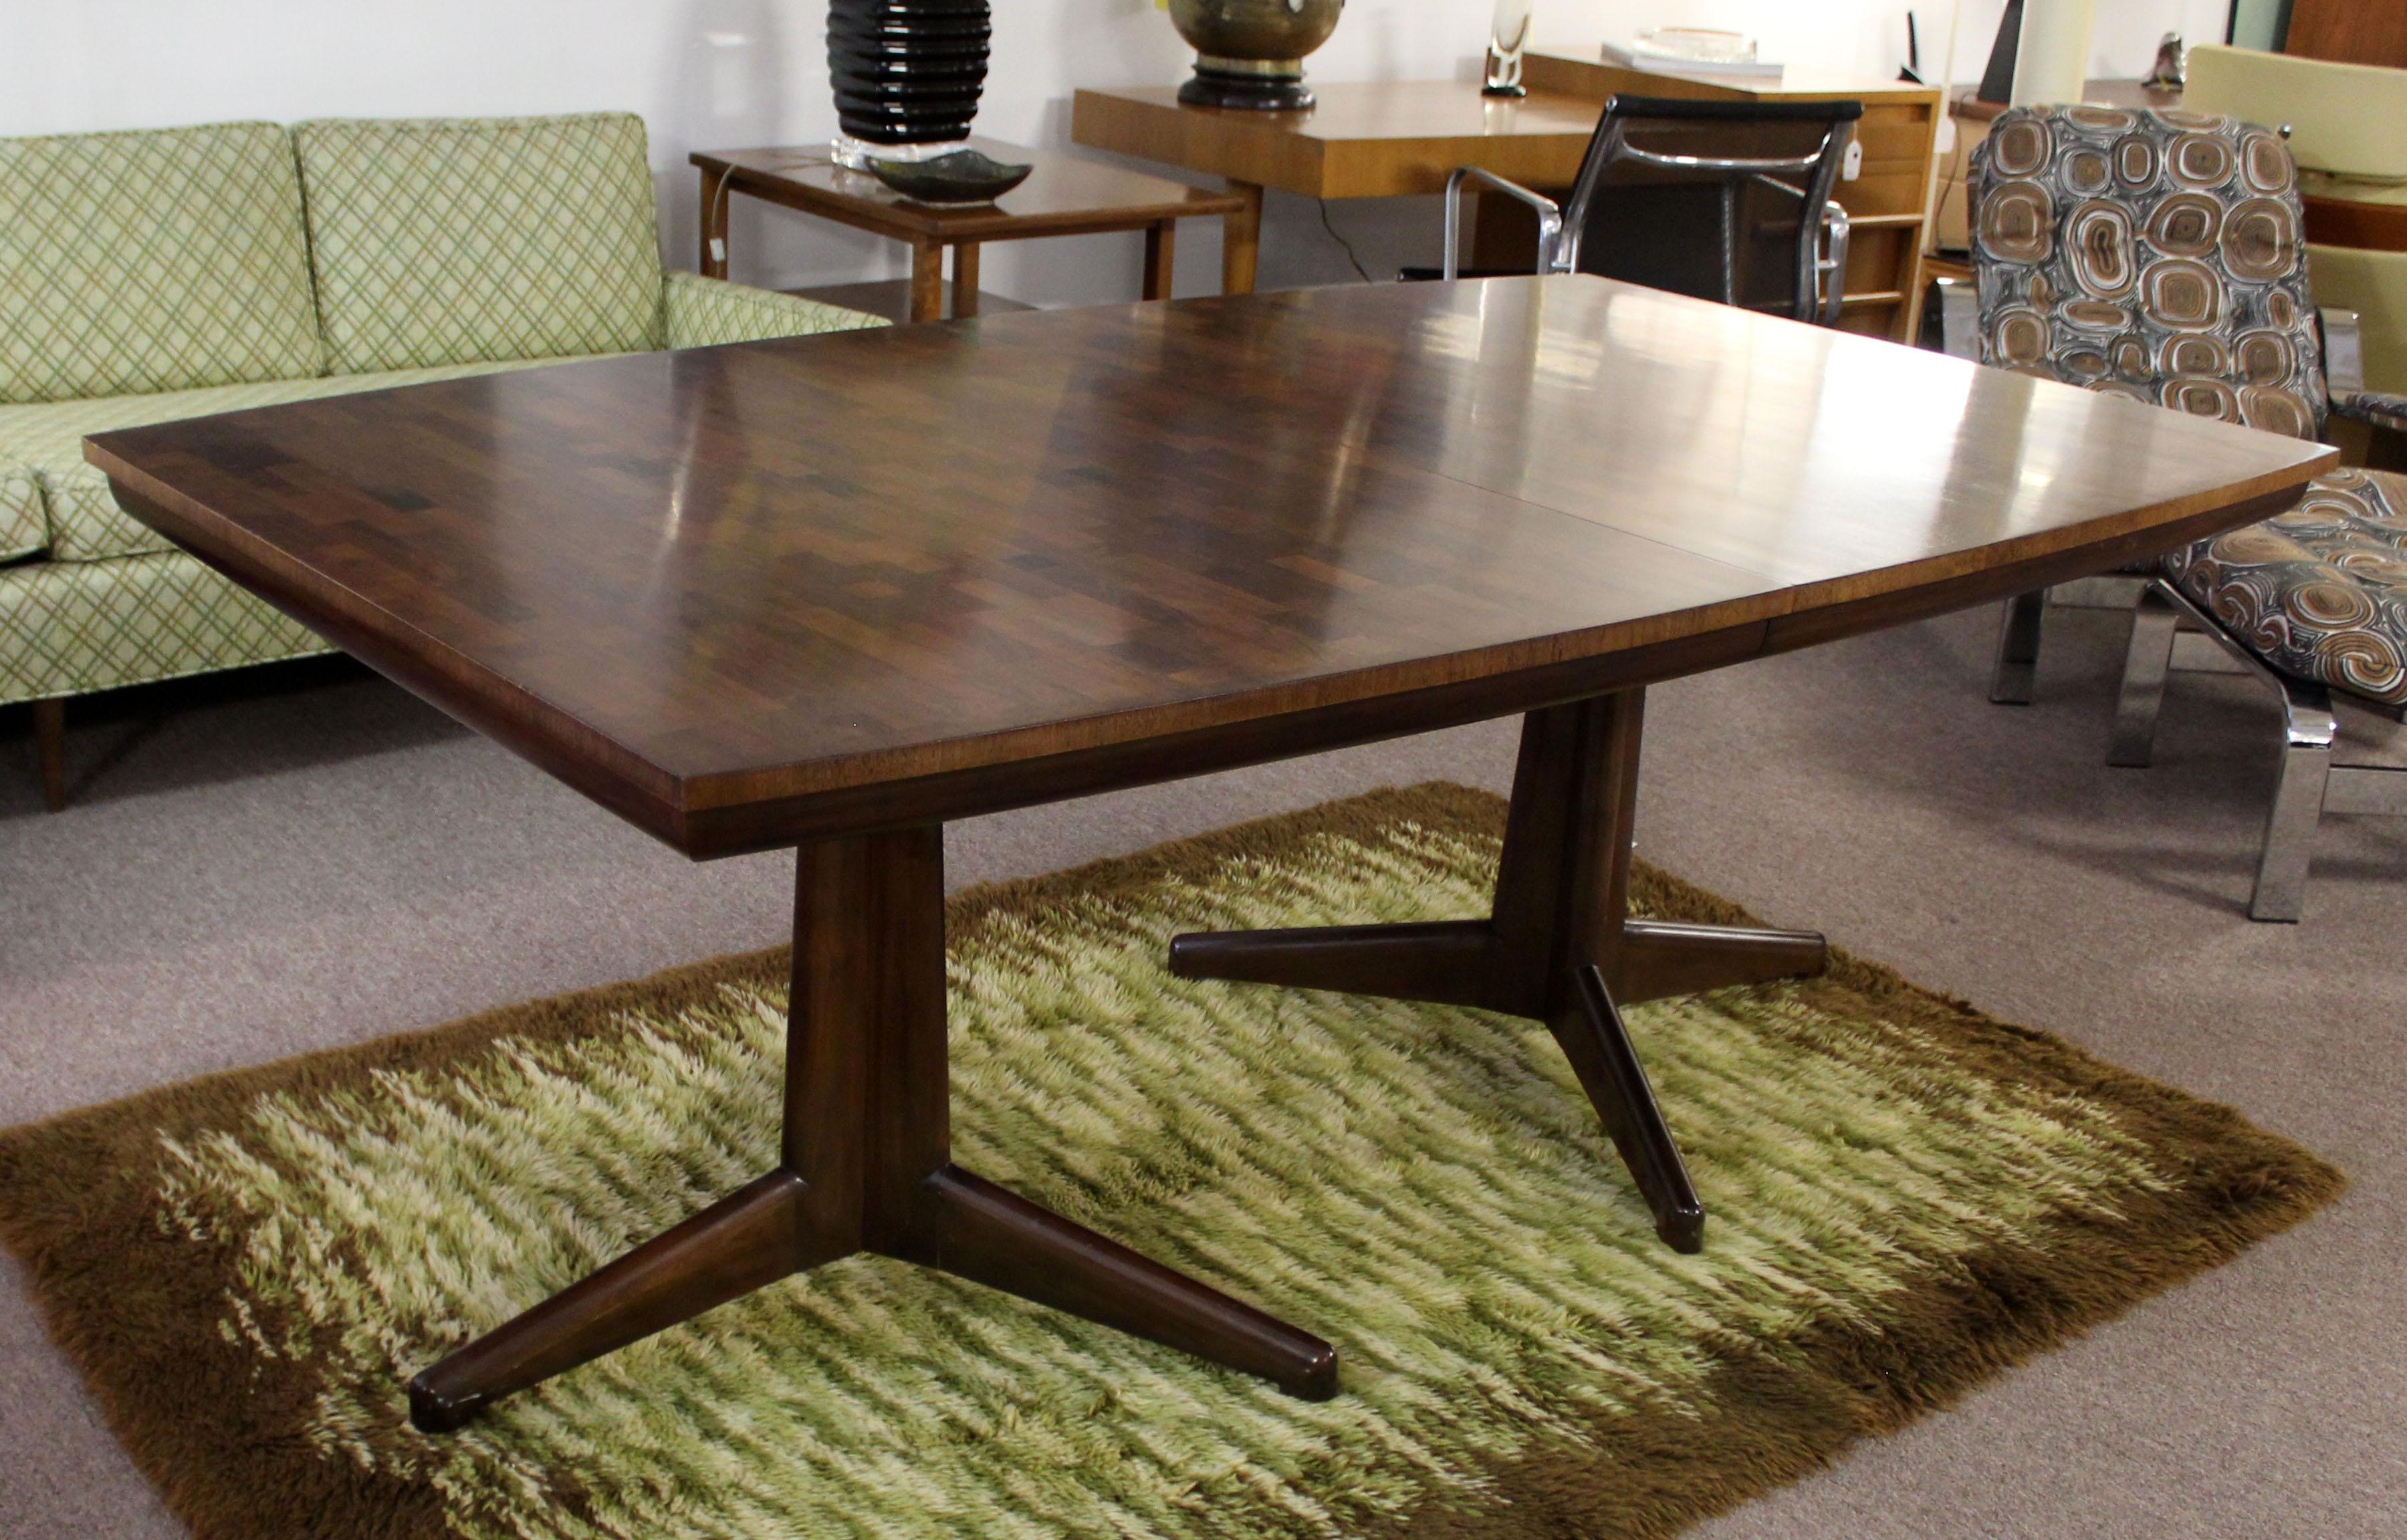 American Mid-Century Modern Dale Ford Widdicomb Expandable Parquet Wood Dining Table